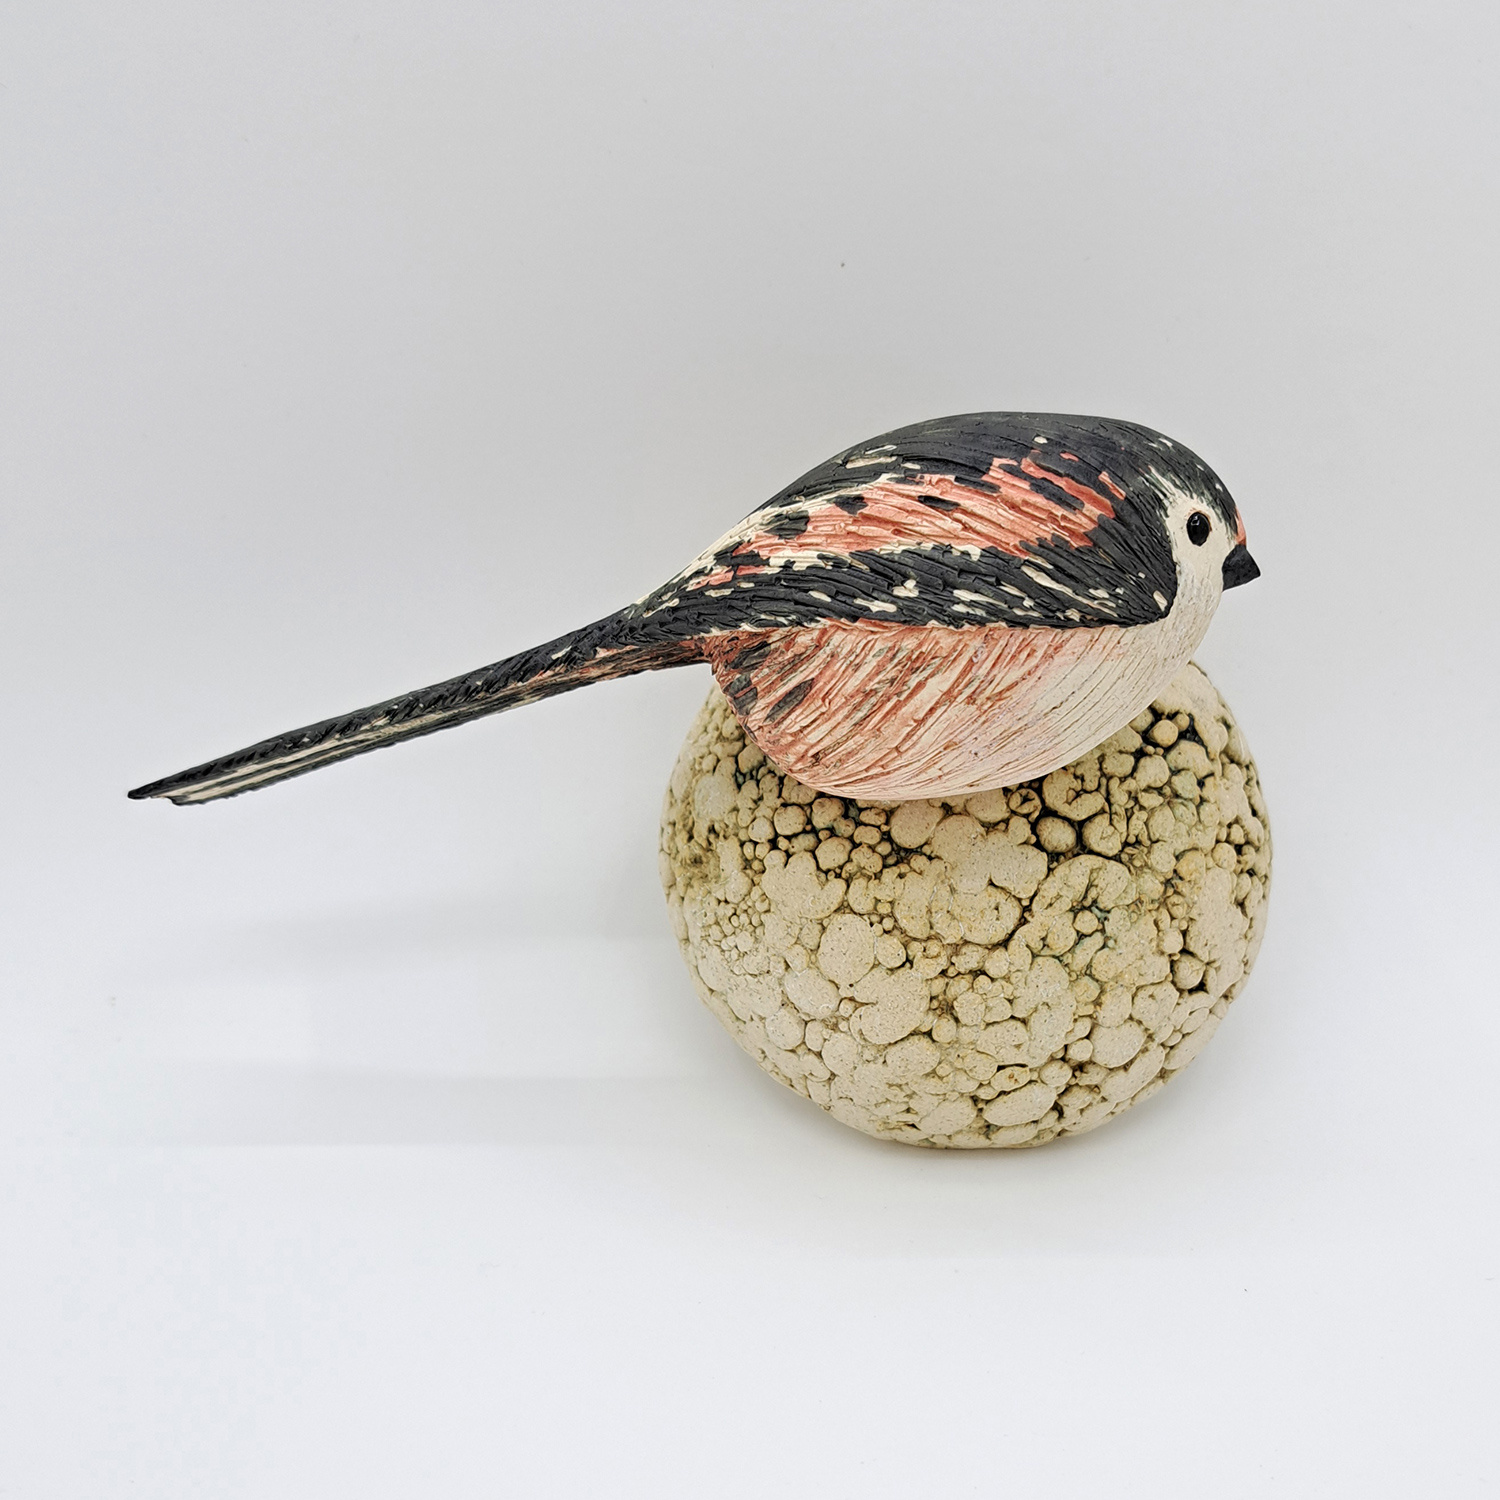 Longtail Tit on Fat Ball by Annie Tortora